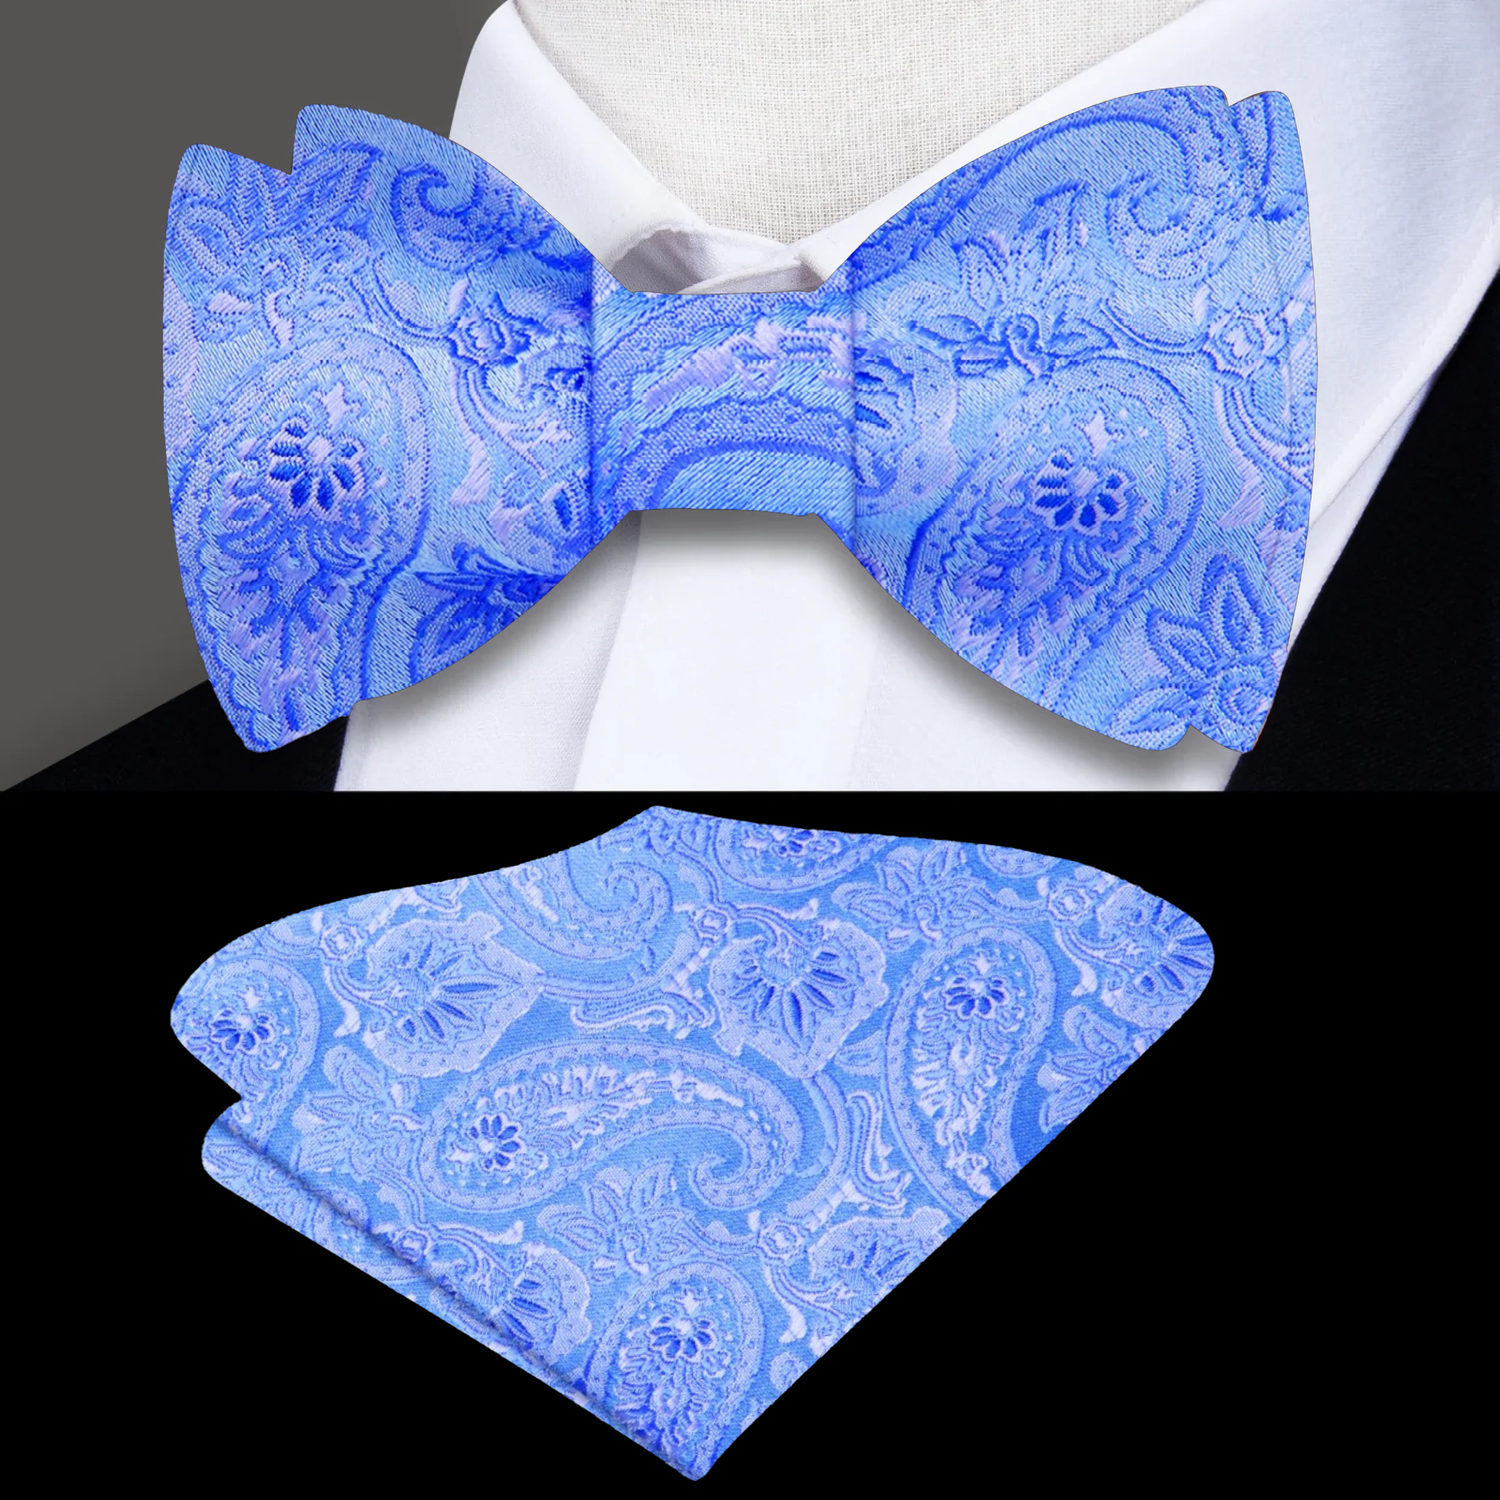 A Light Blue Paisley Pattern Silk Self Tie Bow Tie, Matching Pocket Square